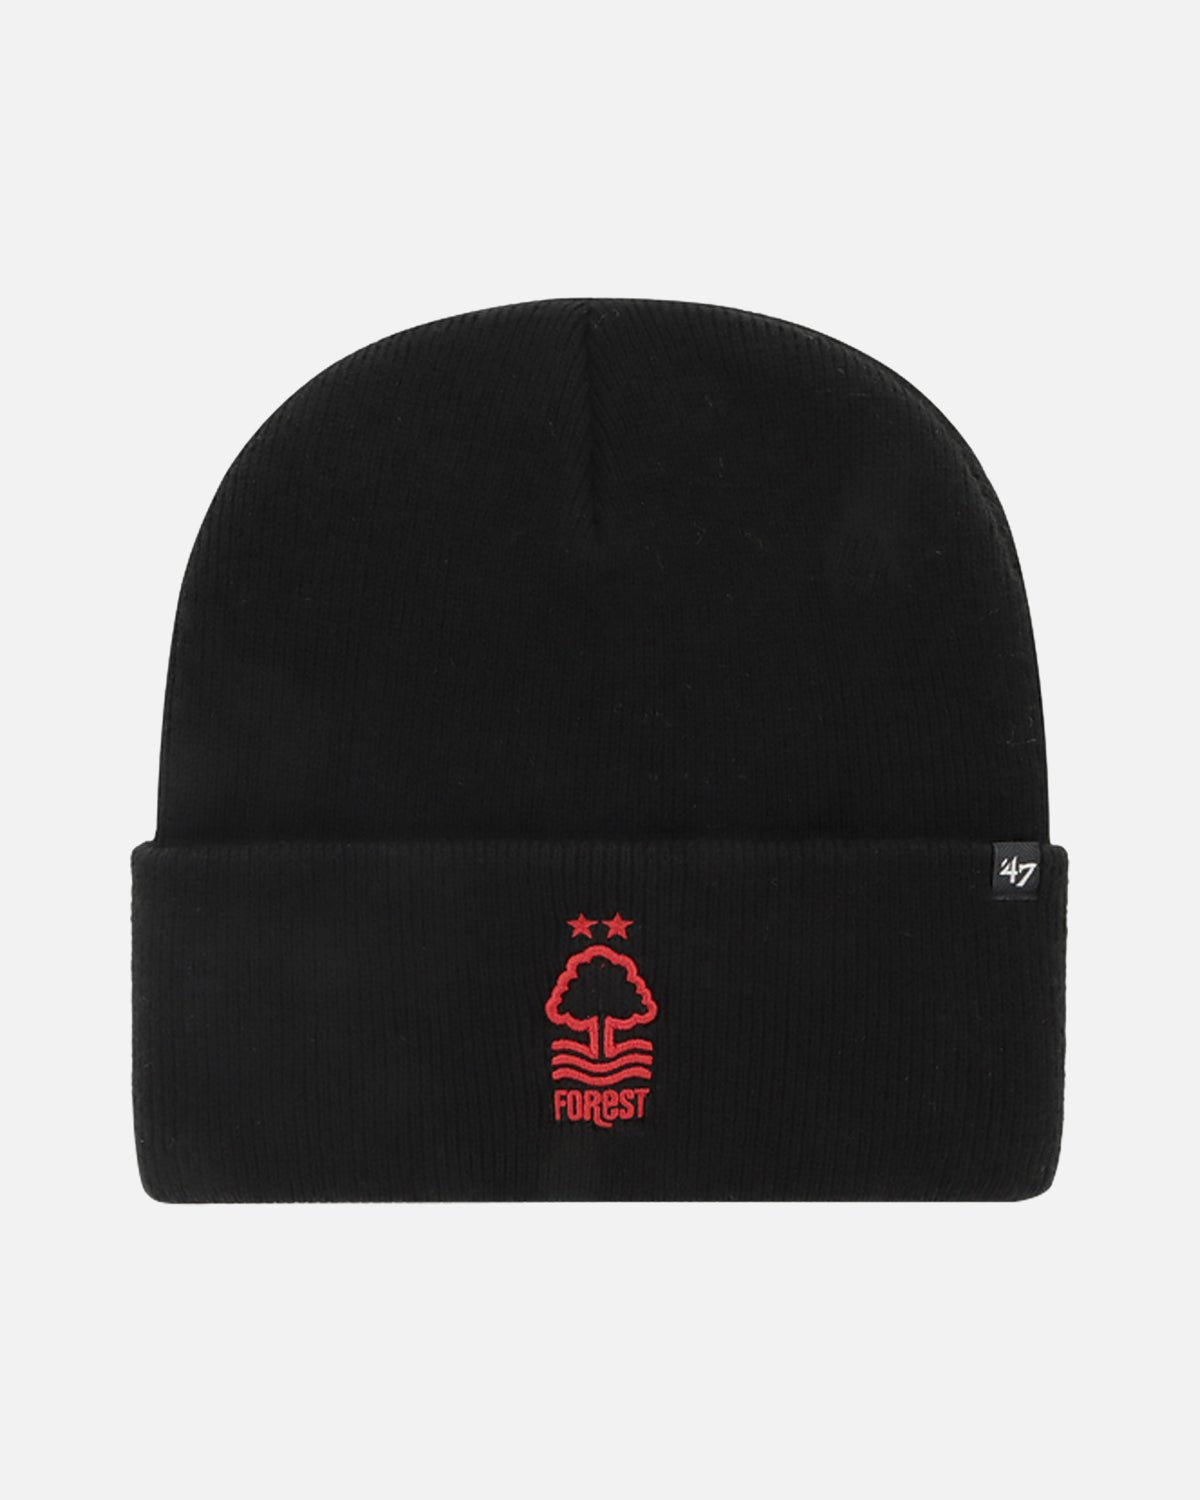 NFFC Black/Red '47 Haymaker Cuff Knit - Nottingham Forest FC